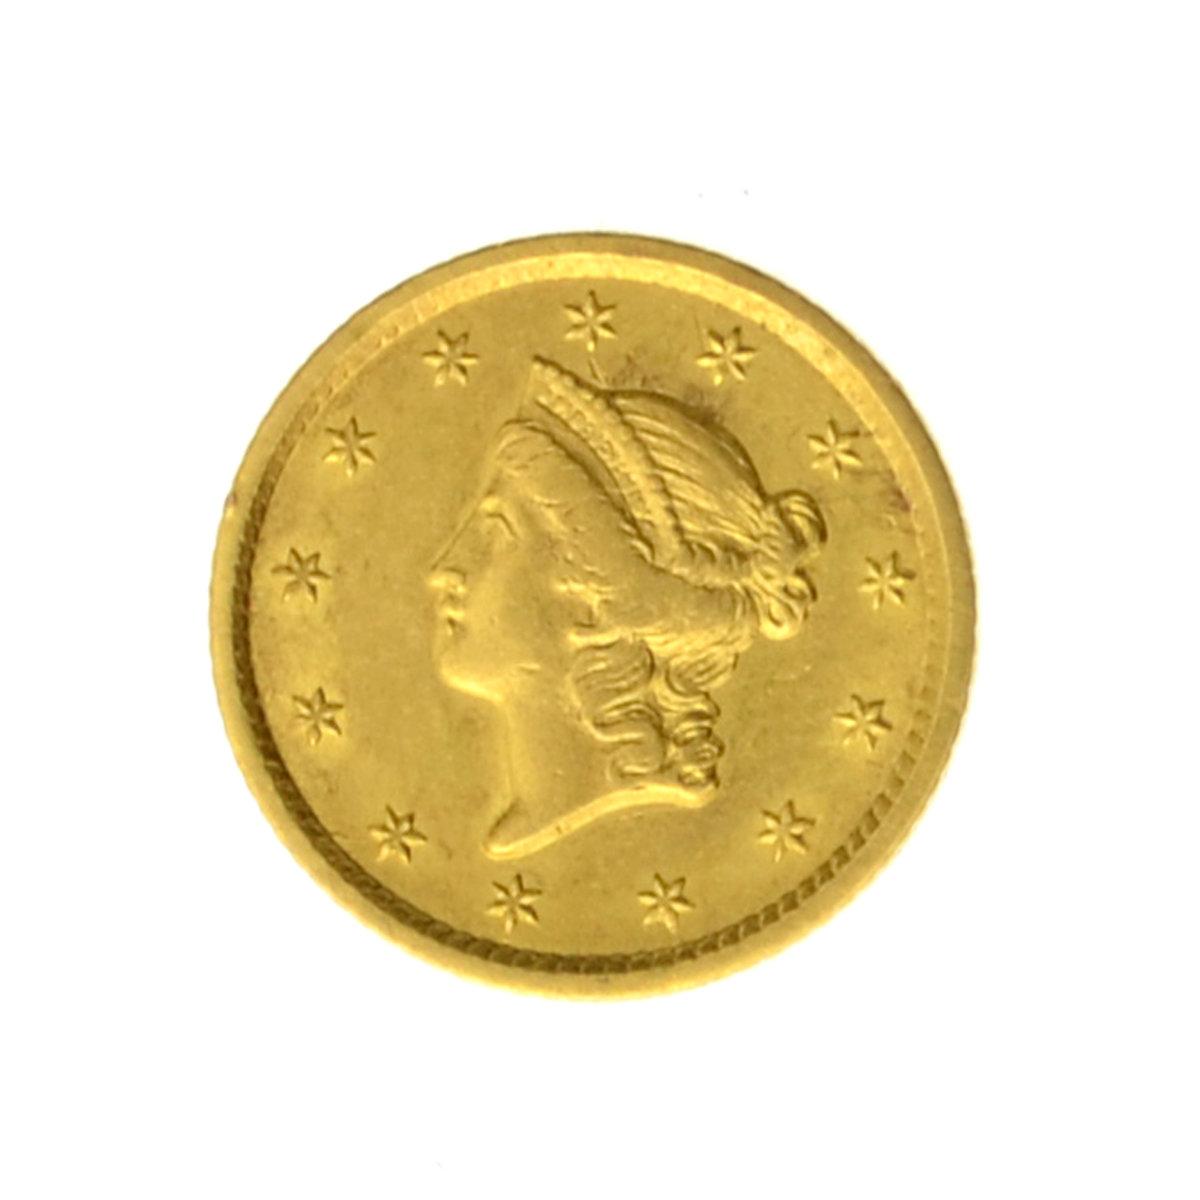 *1852 $1 U.S. Liberty Head Gold Coin - Great Investment - (JG PS)